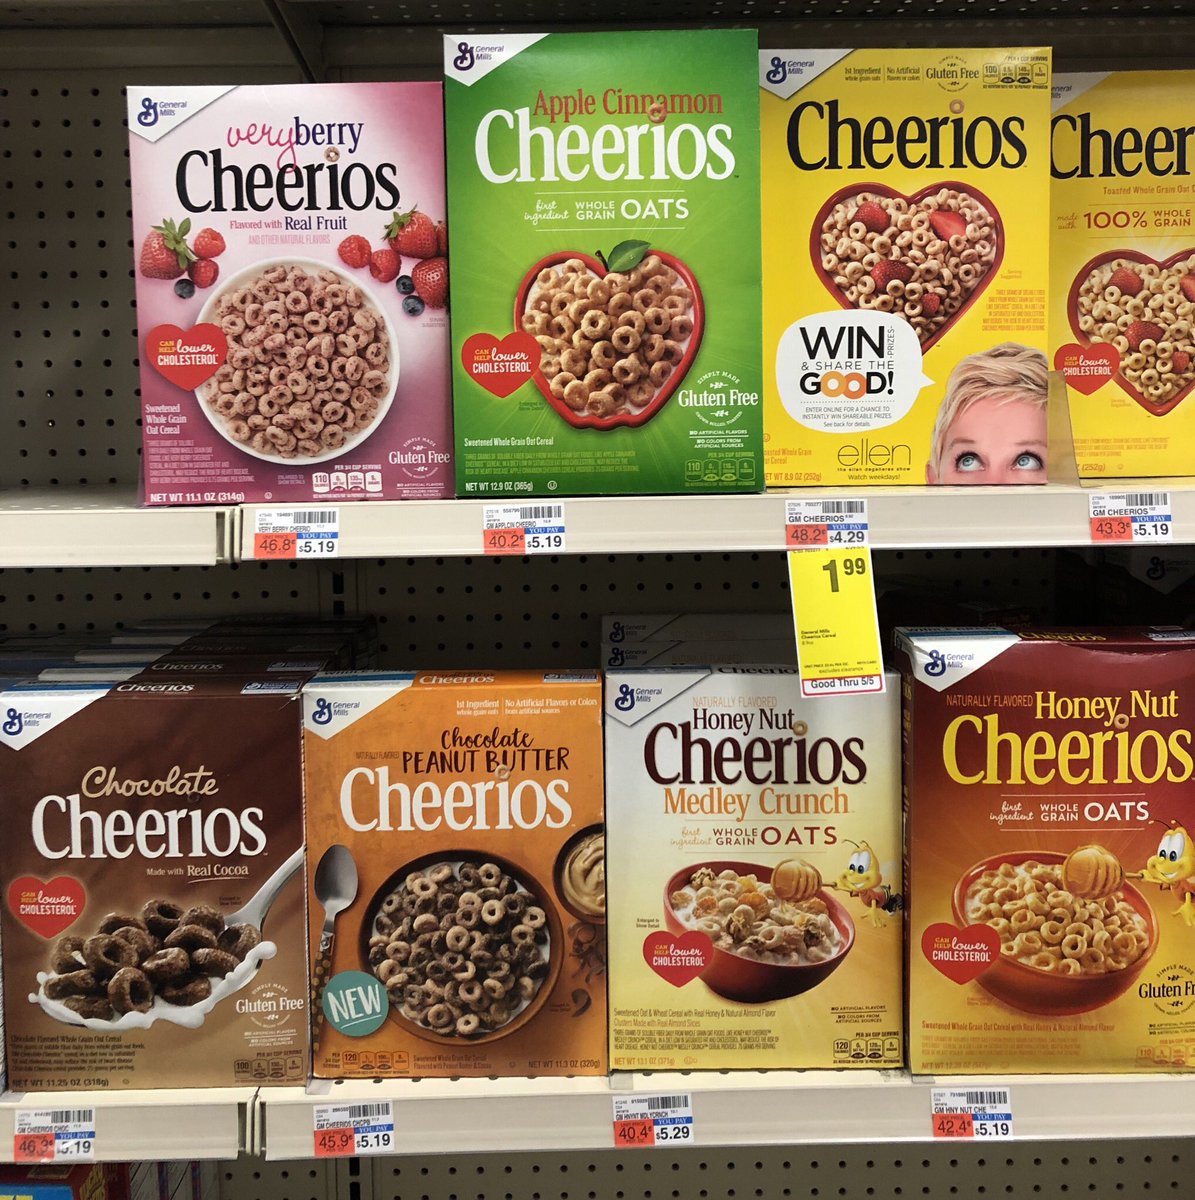 Cheerios need to calm down.